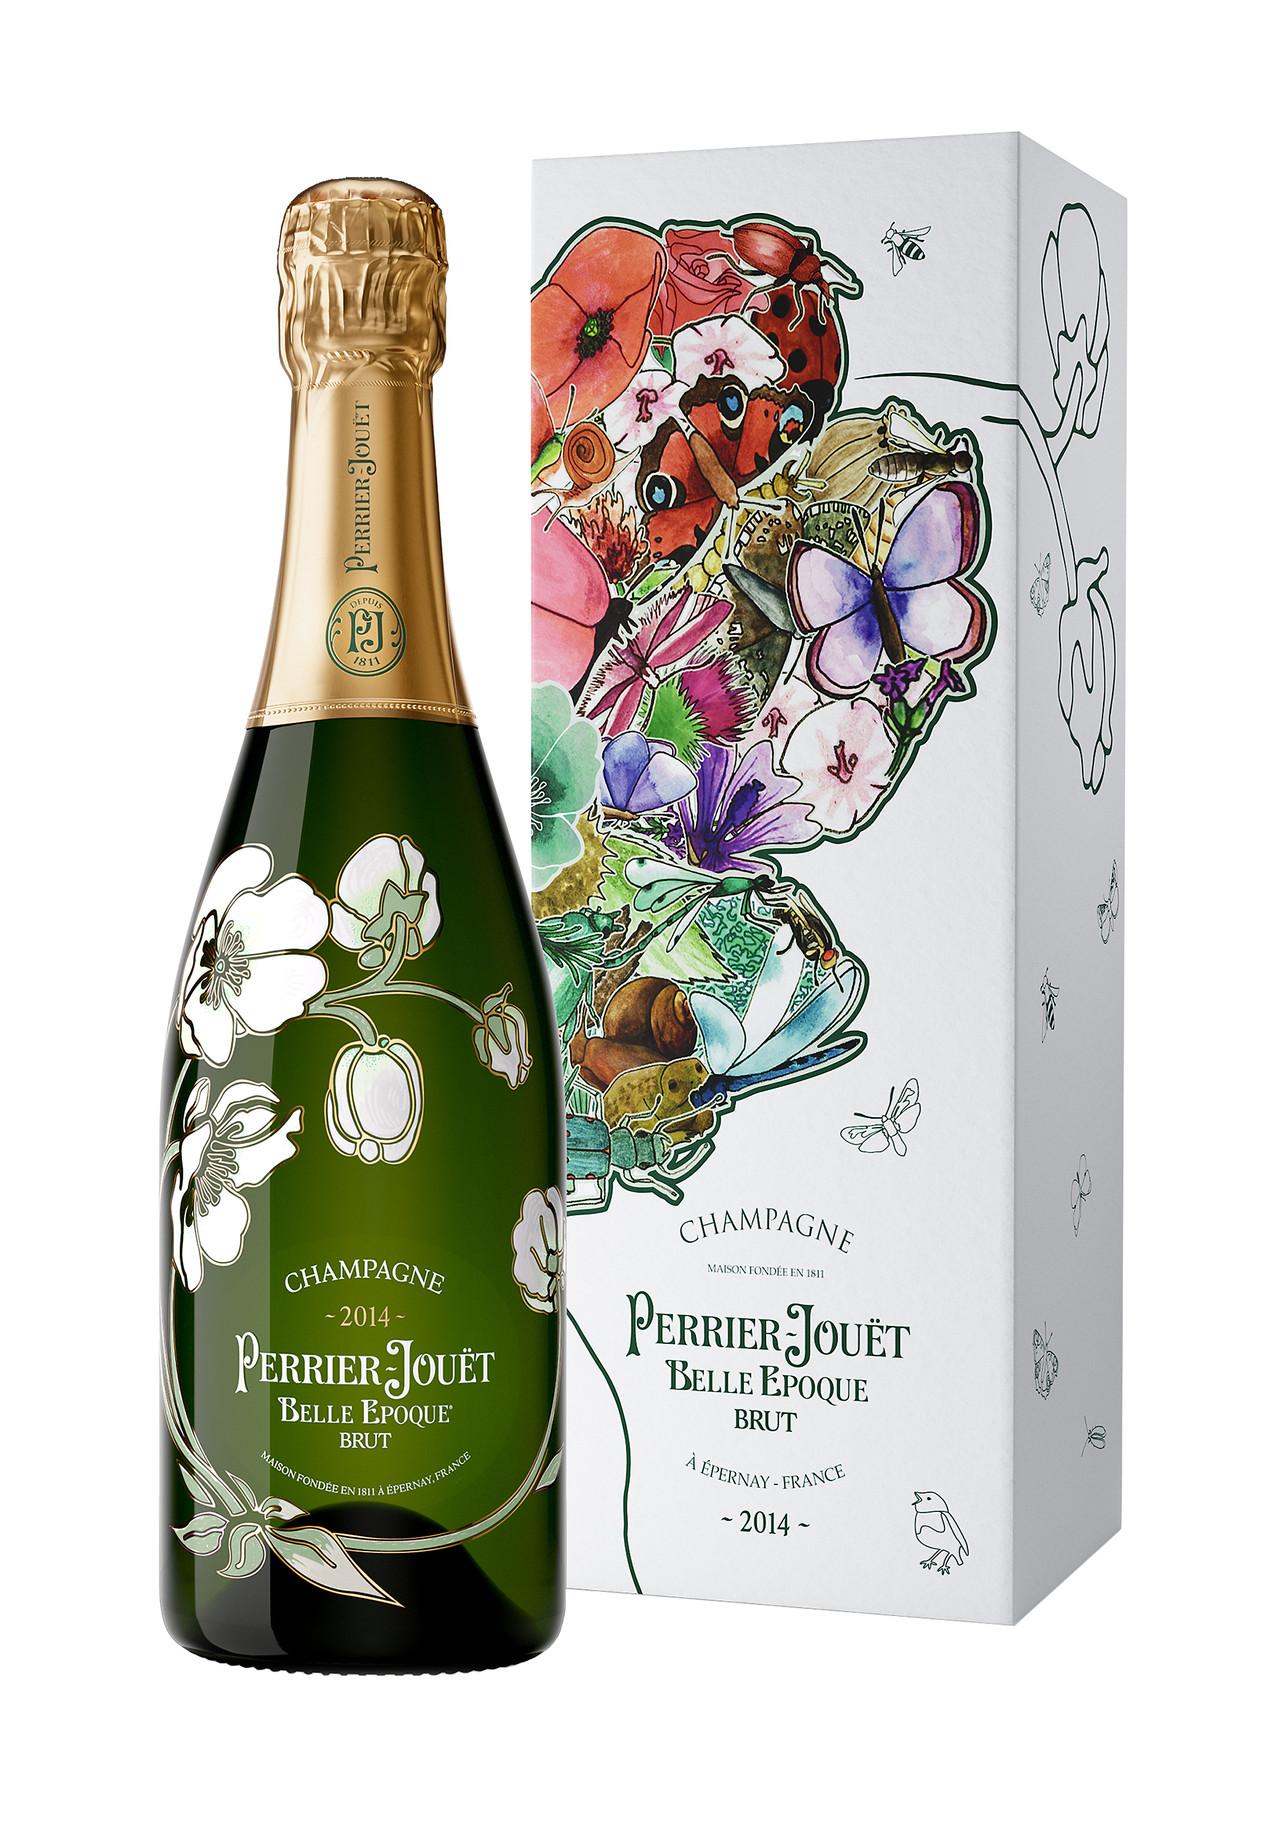 Perrier Jouet Belle Epoque 2014 Box ペリエ ジュエ ベル エポック 2014 ギフト箱入り 白 750ml